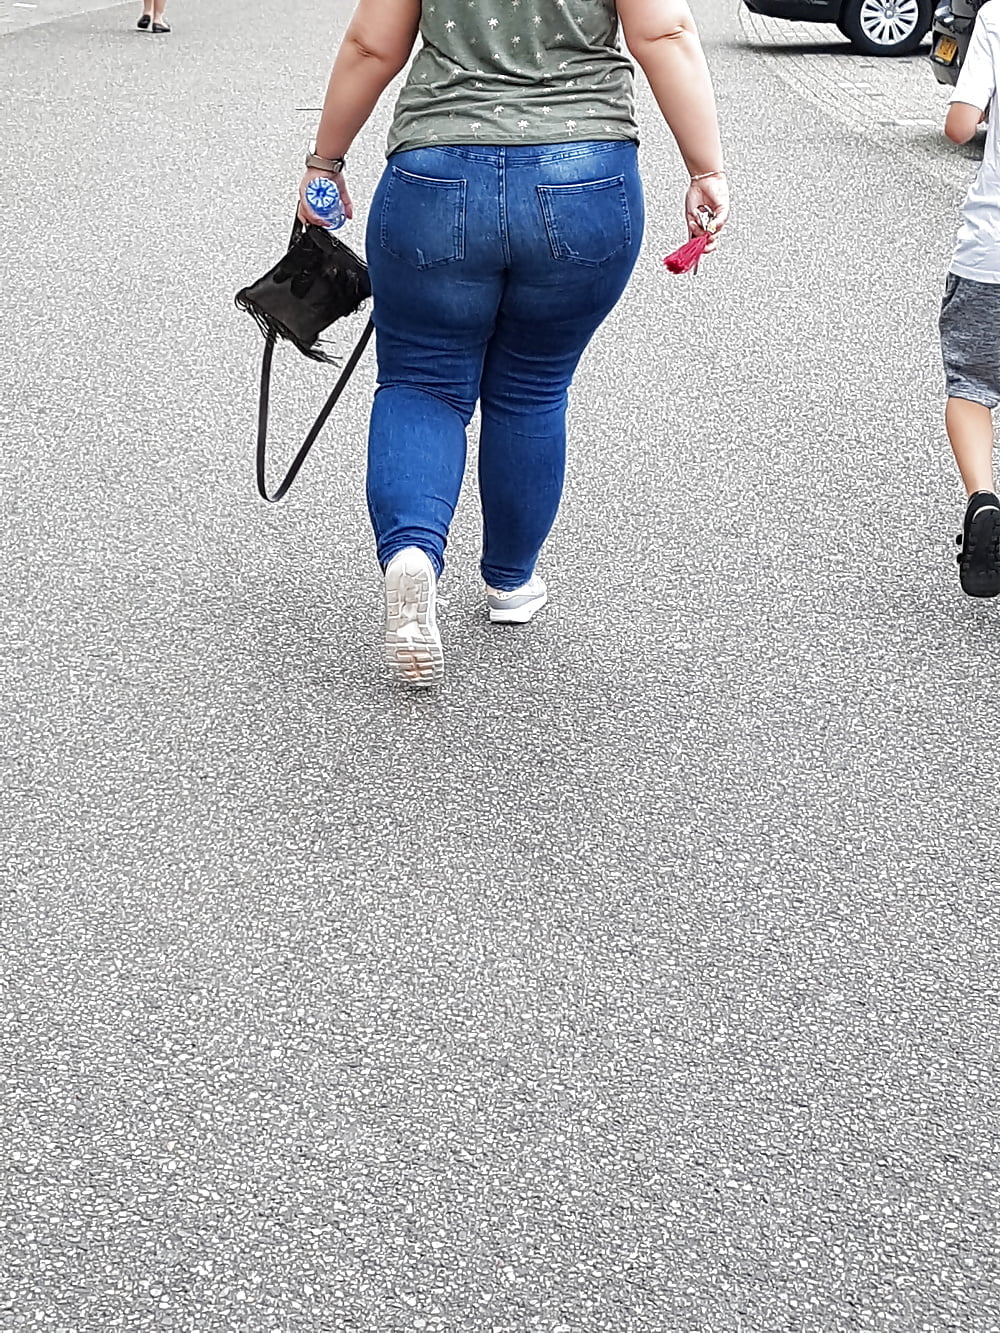 Bbw_milf_with_thick_legs_and_butt_in_tight_jeans (6/34)